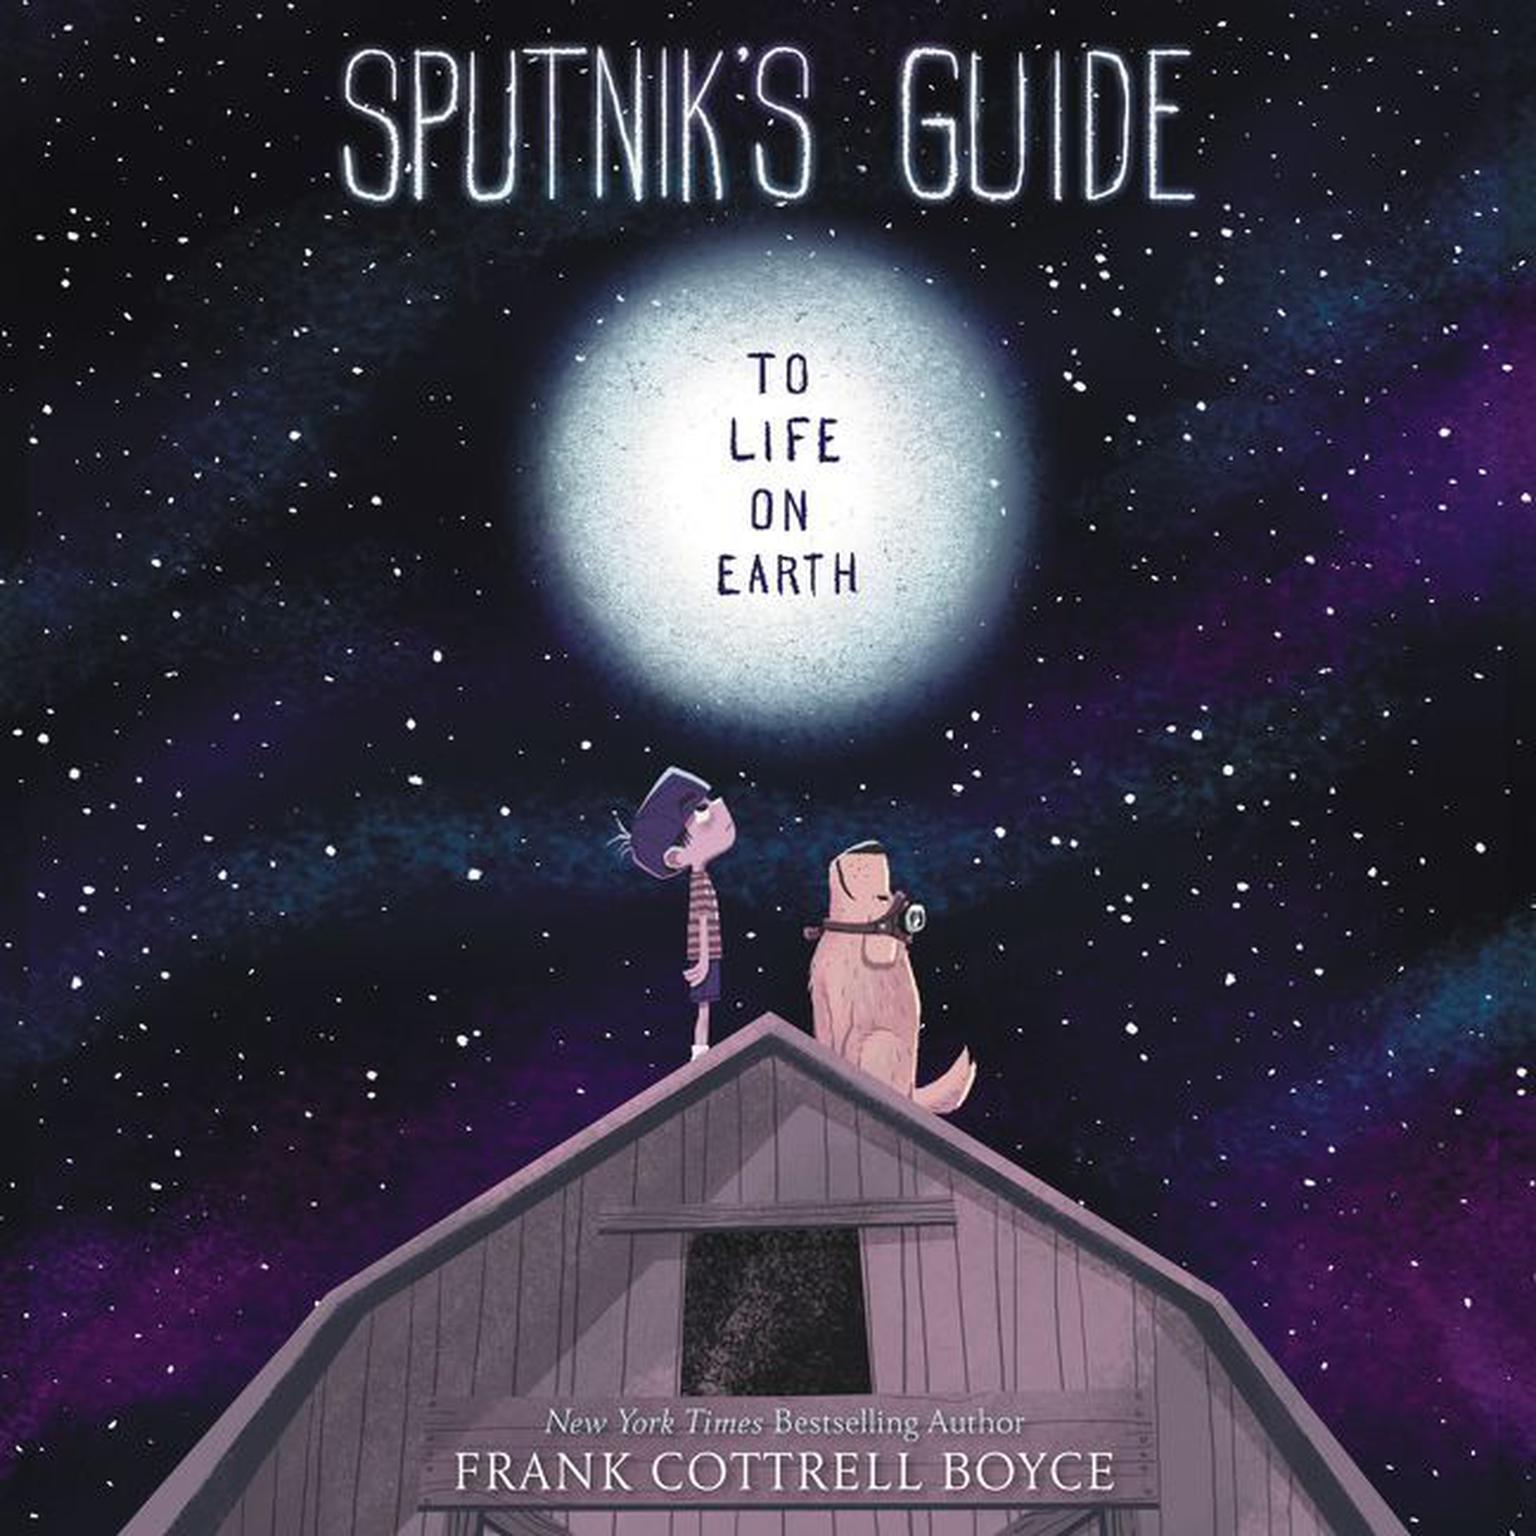 Sputniks Guide to Life on Earth Audiobook, by Frank Cottrell Boyce